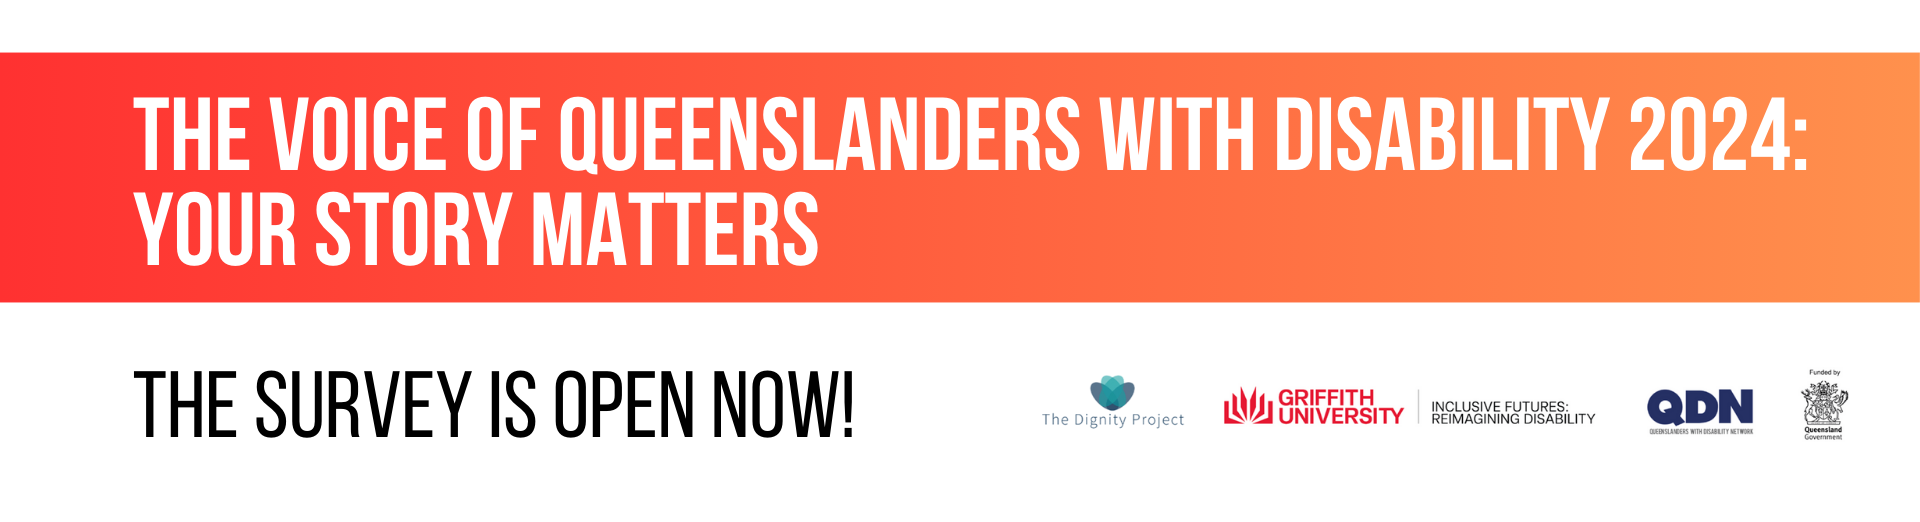 Banner on website with orange and white background. Text reads, 'Voice of Queenslanders with Disability 2024: Your Voice Matters. The Survey is open Now.' Logos at the bottom right include the Dignity Project logo, Griffith University logo, QDN logo, and Queensland Government logo.